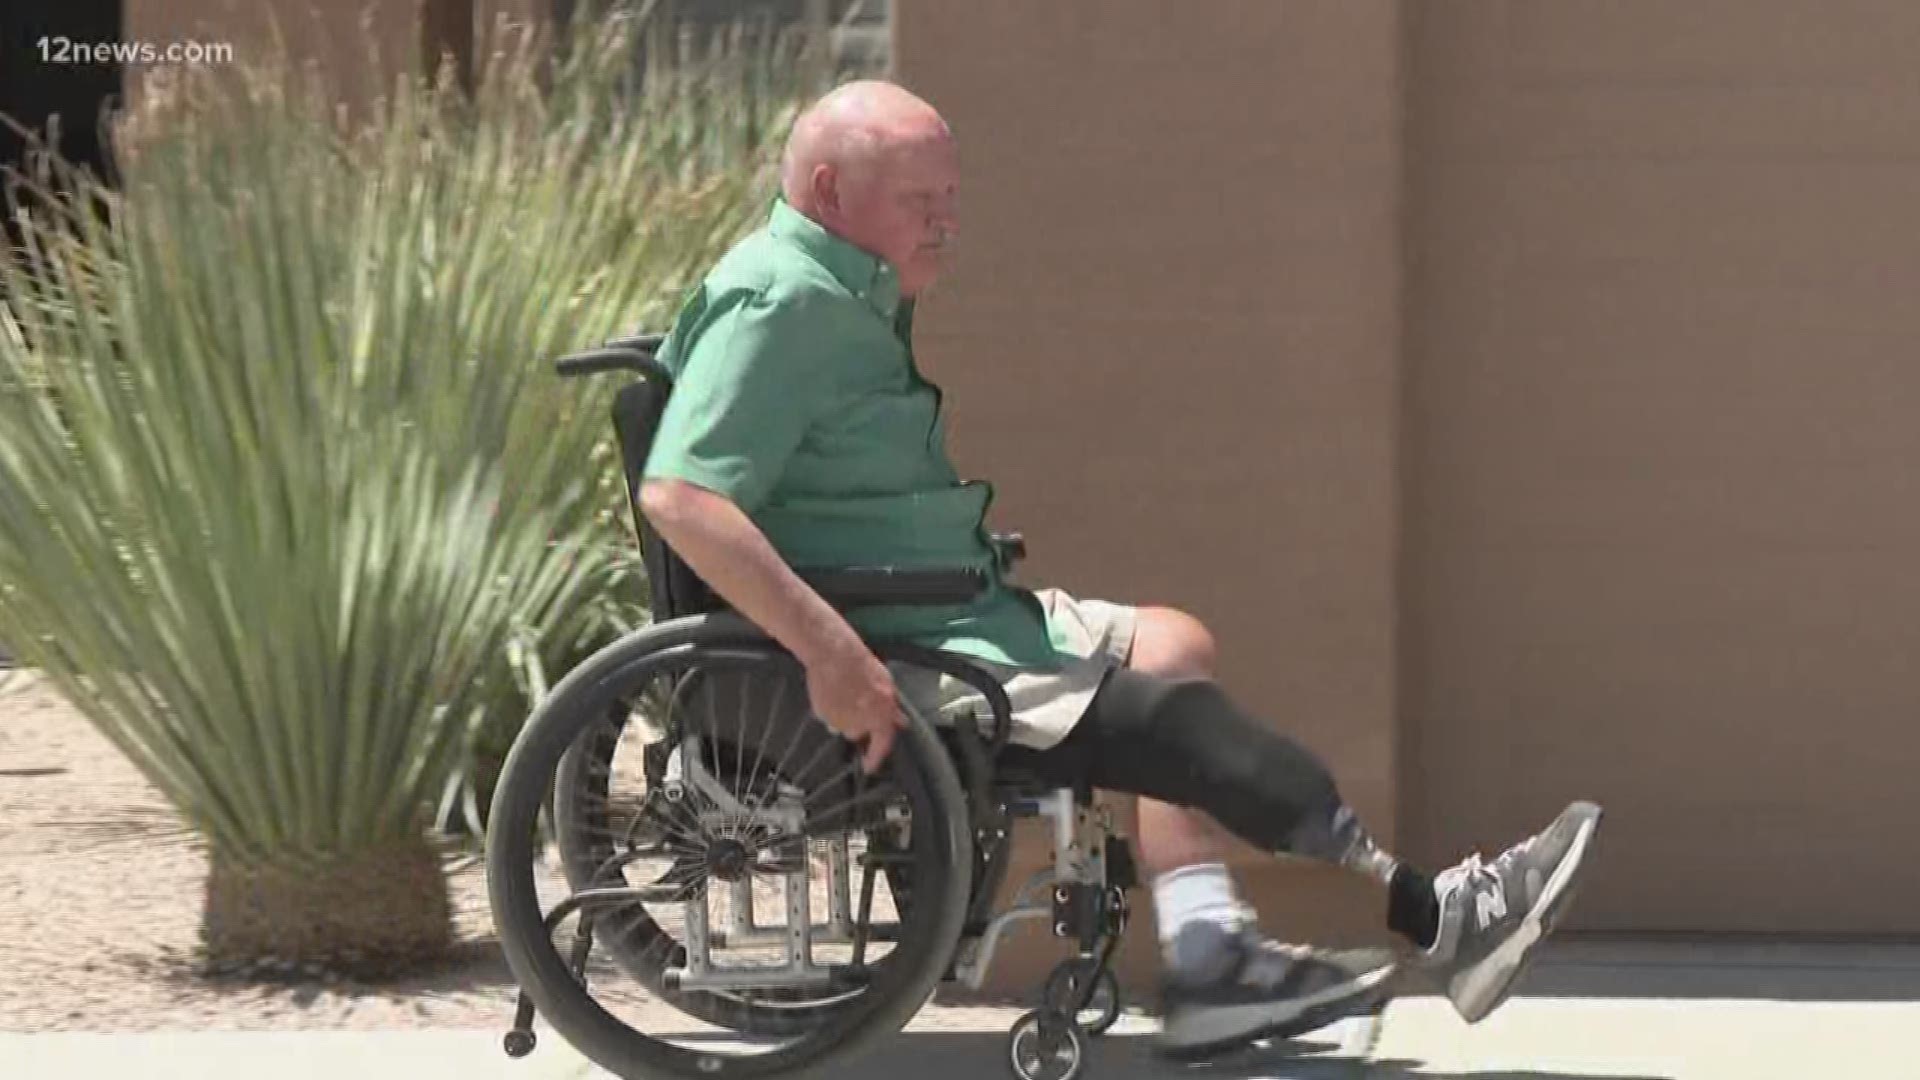 A Vietnam veteran has been forced to suffer through the bureaucracy of the V.A. as his recovery from a leg amputation is put on hold. Thanks to questions from 12 News he is now getting his prosthetic leg after more than 5 months of waiting.